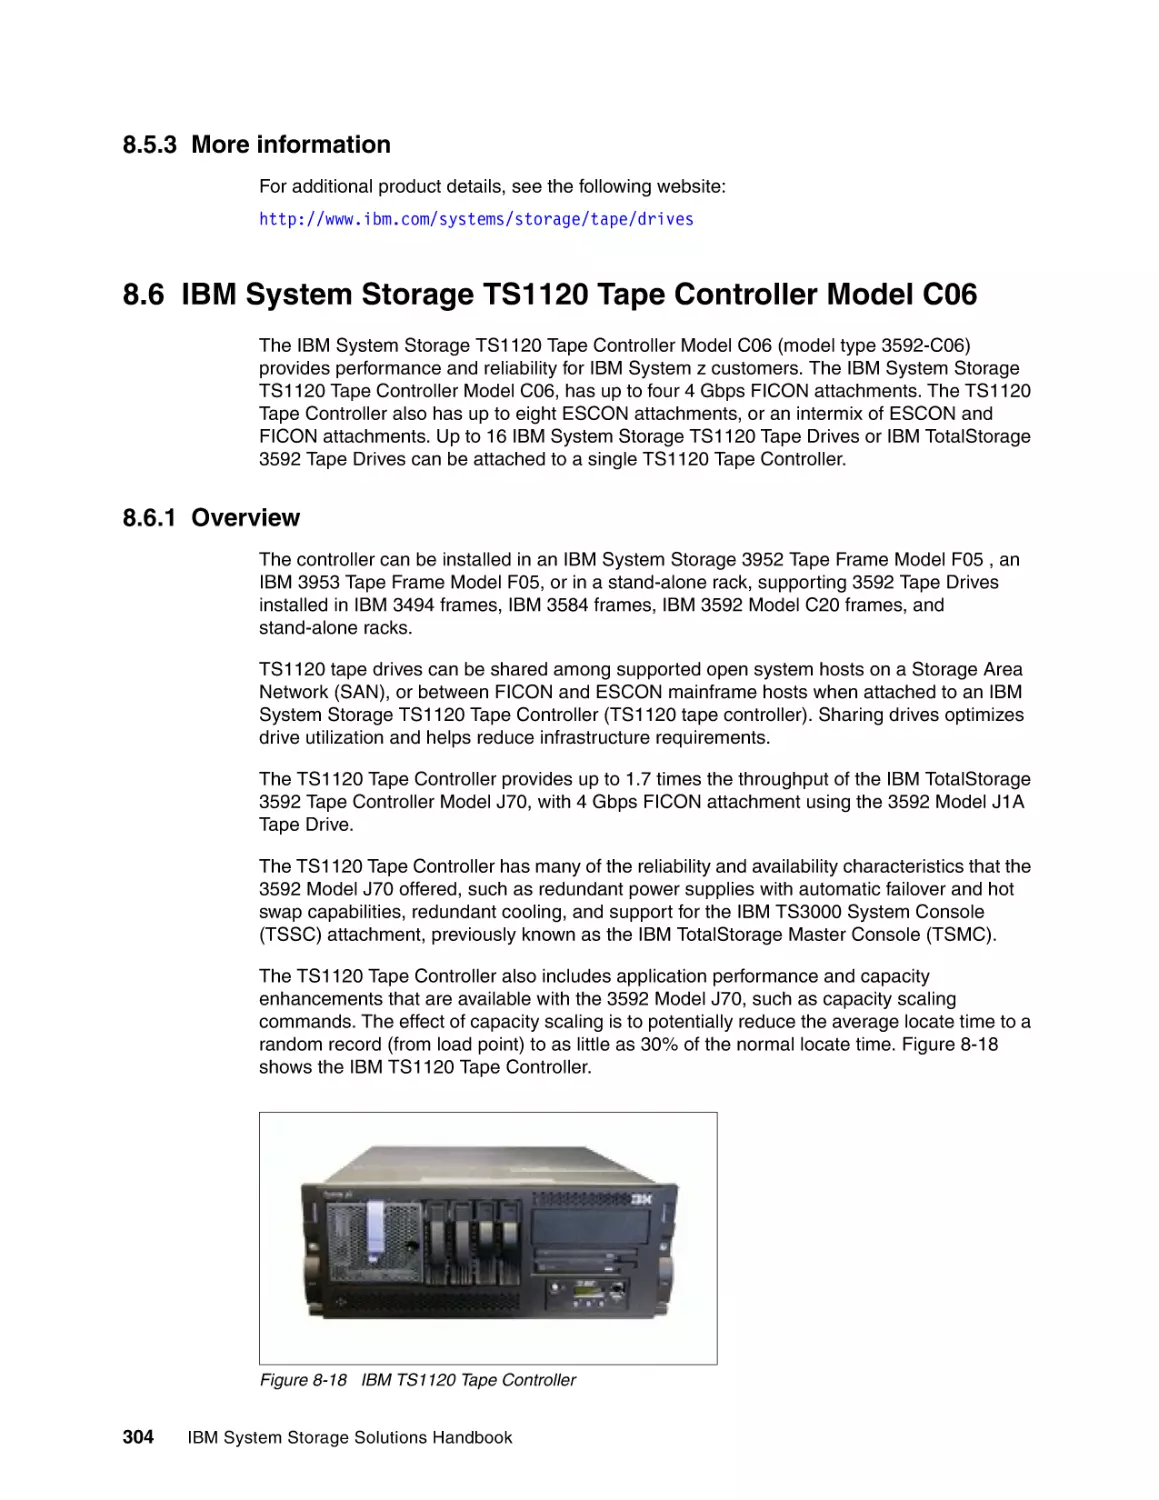 8.5.3 More information
8.6 IBM System Storage TS1120 Tape Controller Model C06
8.6.1 Overview